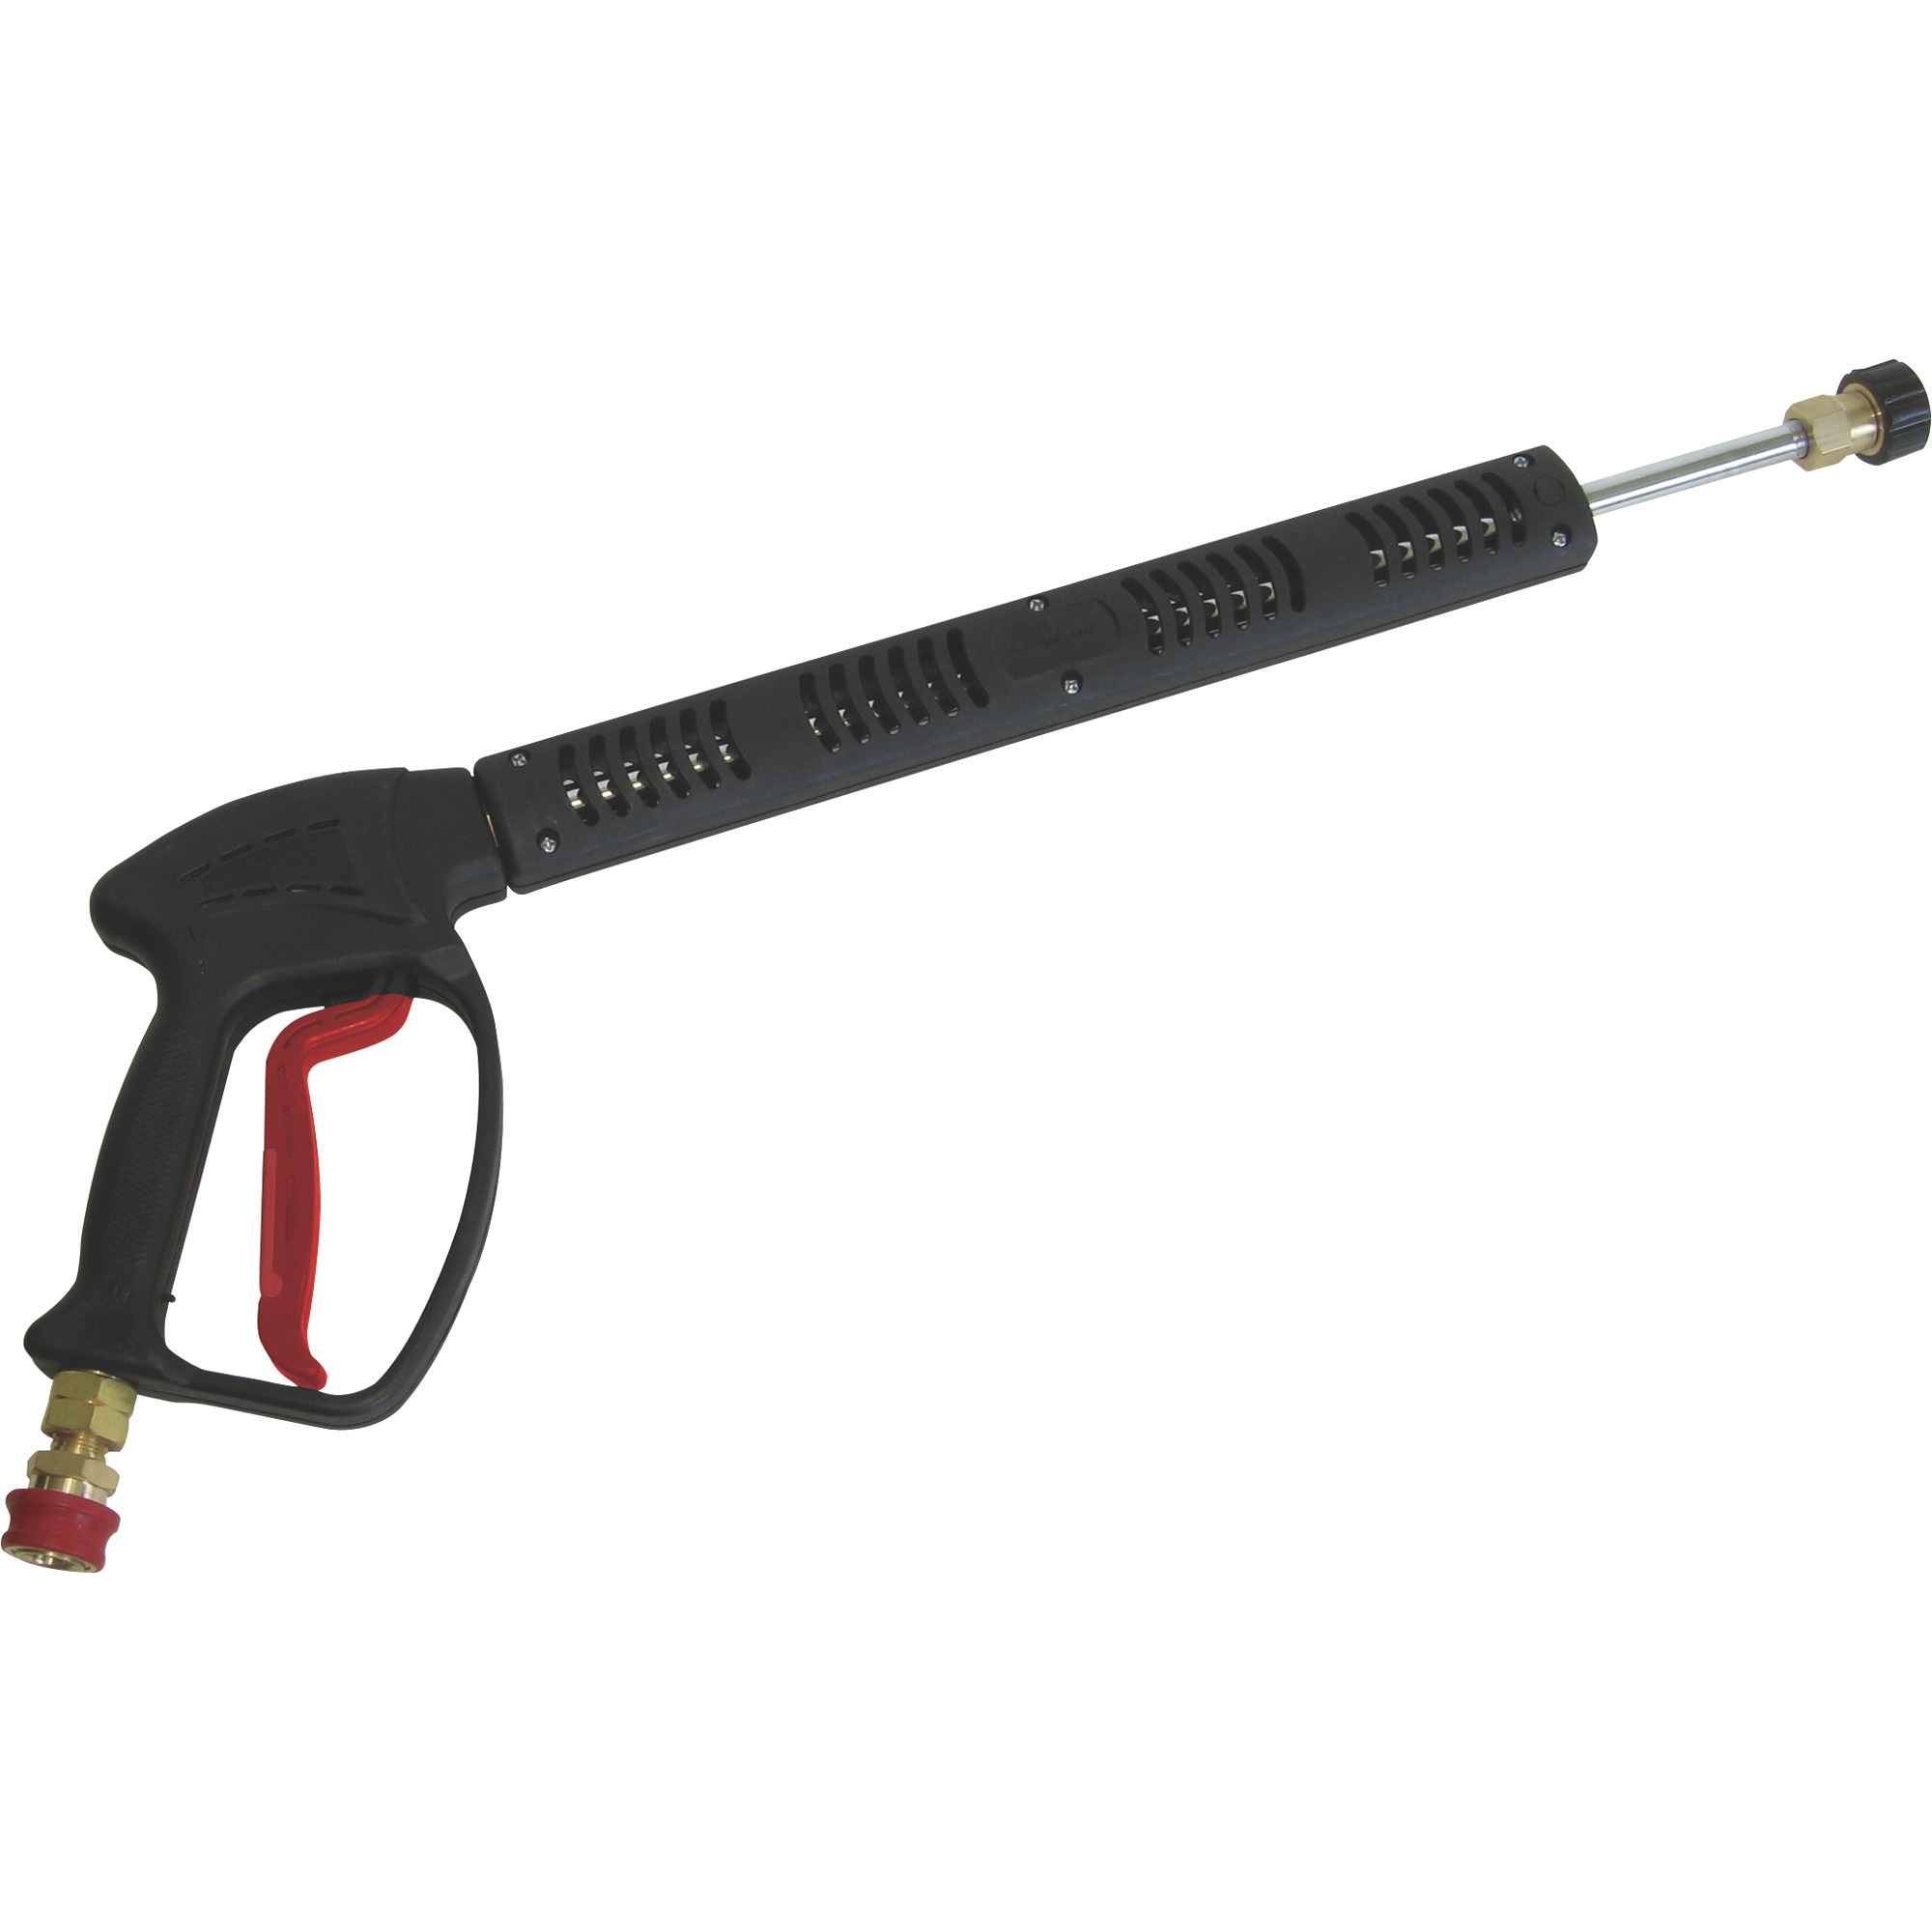 NorthStar Hot Water Pressure Washer Gun with Vented Lance â 5000 PSI, 10.5 GPM, Model ND20006P